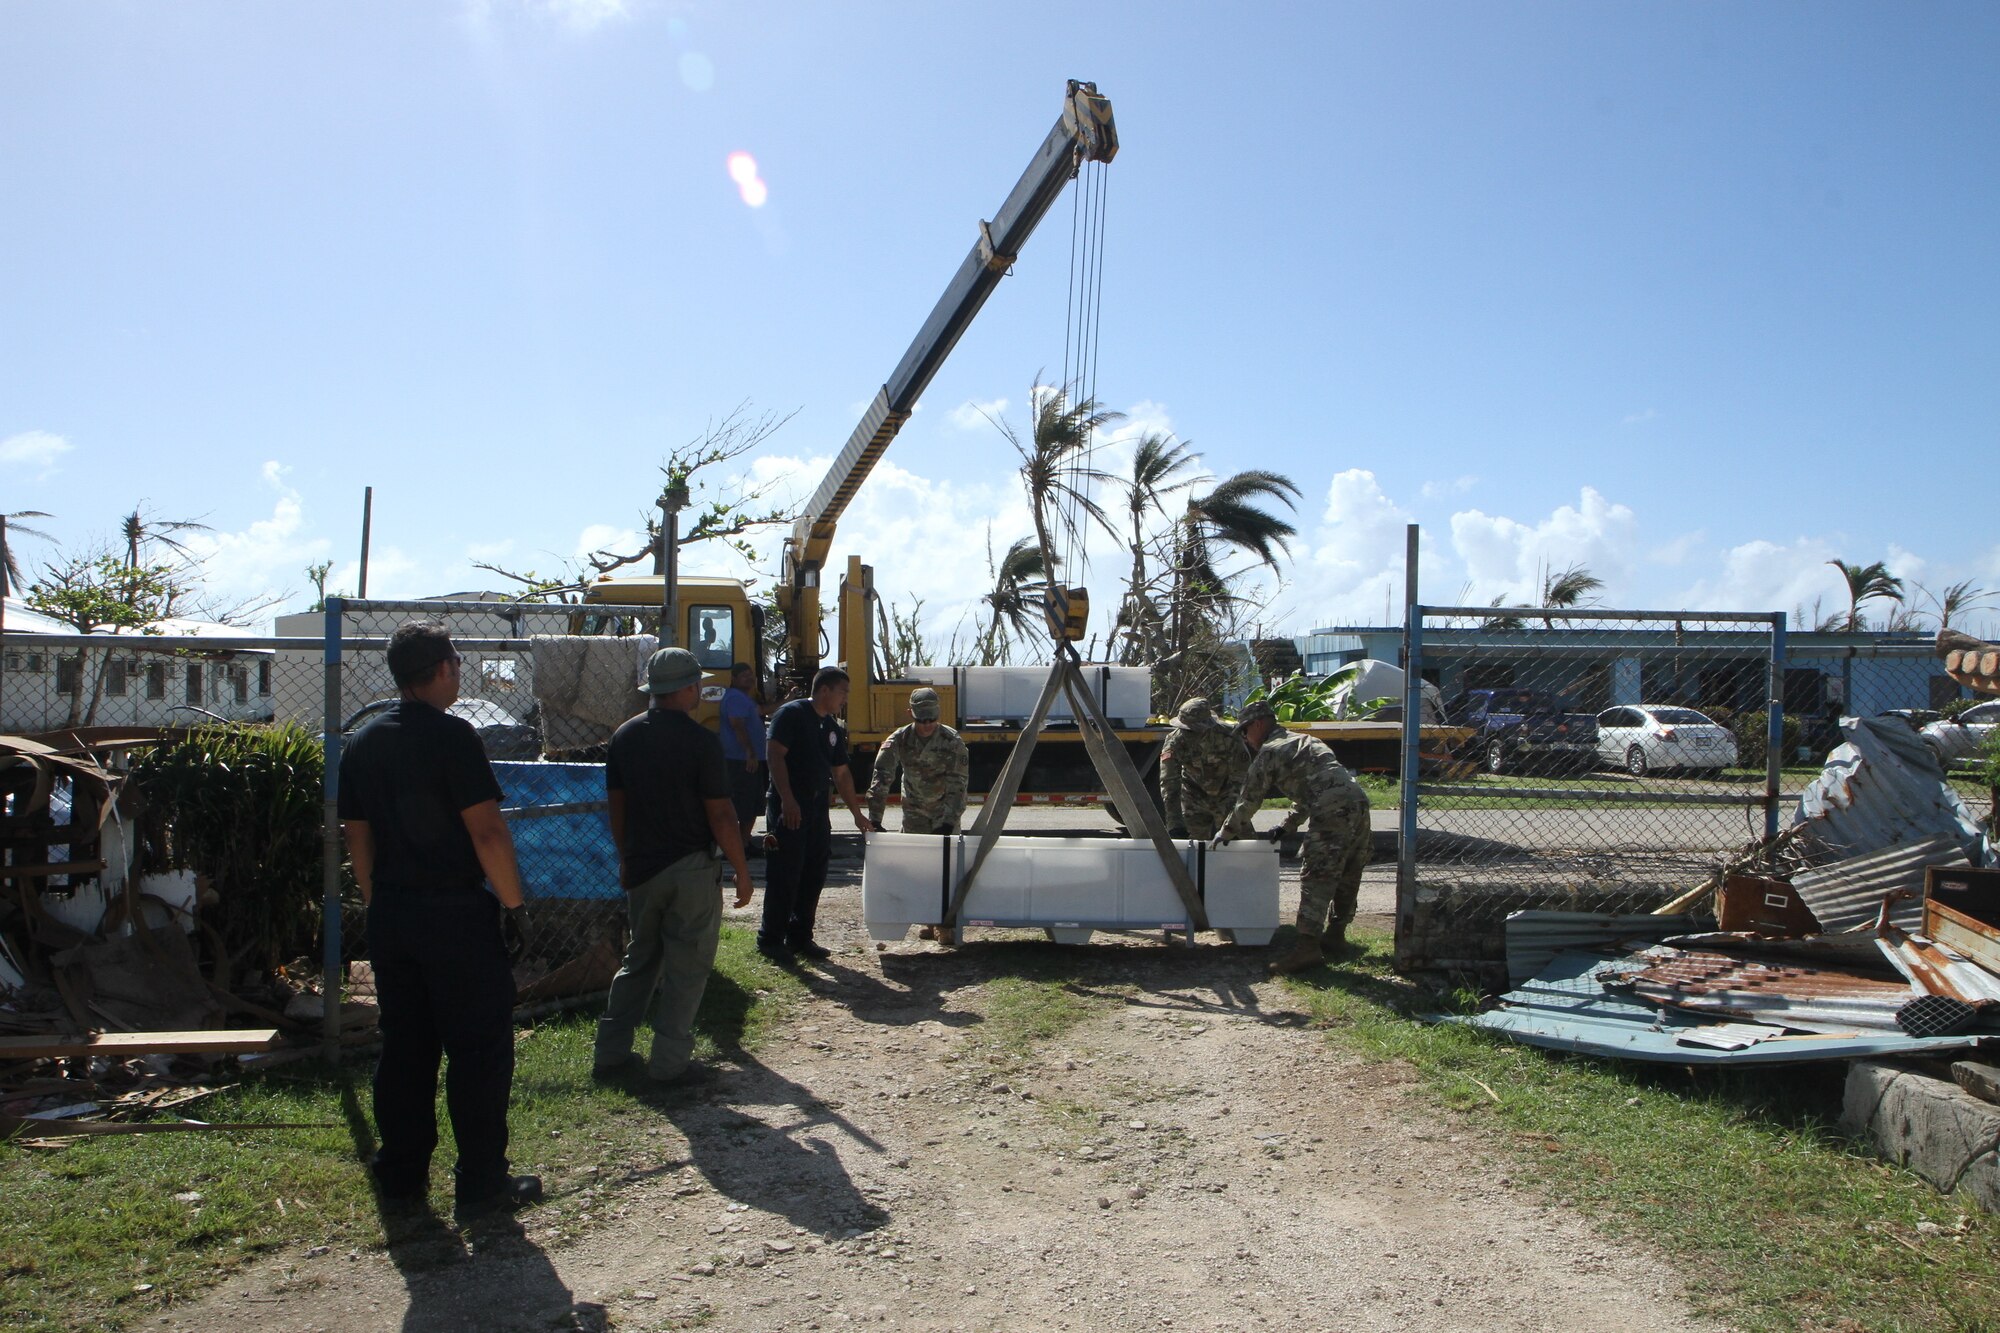 U.S. Army Reserve Soldiers with the 797th Engineer Company (Vertical), 9th Mission Support Command, and personnel with the Department of Fire and Emergency Services offload a FEMA tent as part of the Temporary Emergency Tent and Roofing Installation Support program implemented by the Commonwealth of the Northern Mariana Islands government and the FEMA, at a residency in Koblerville, Saipan, CNMI, Nov. 9, 2018.